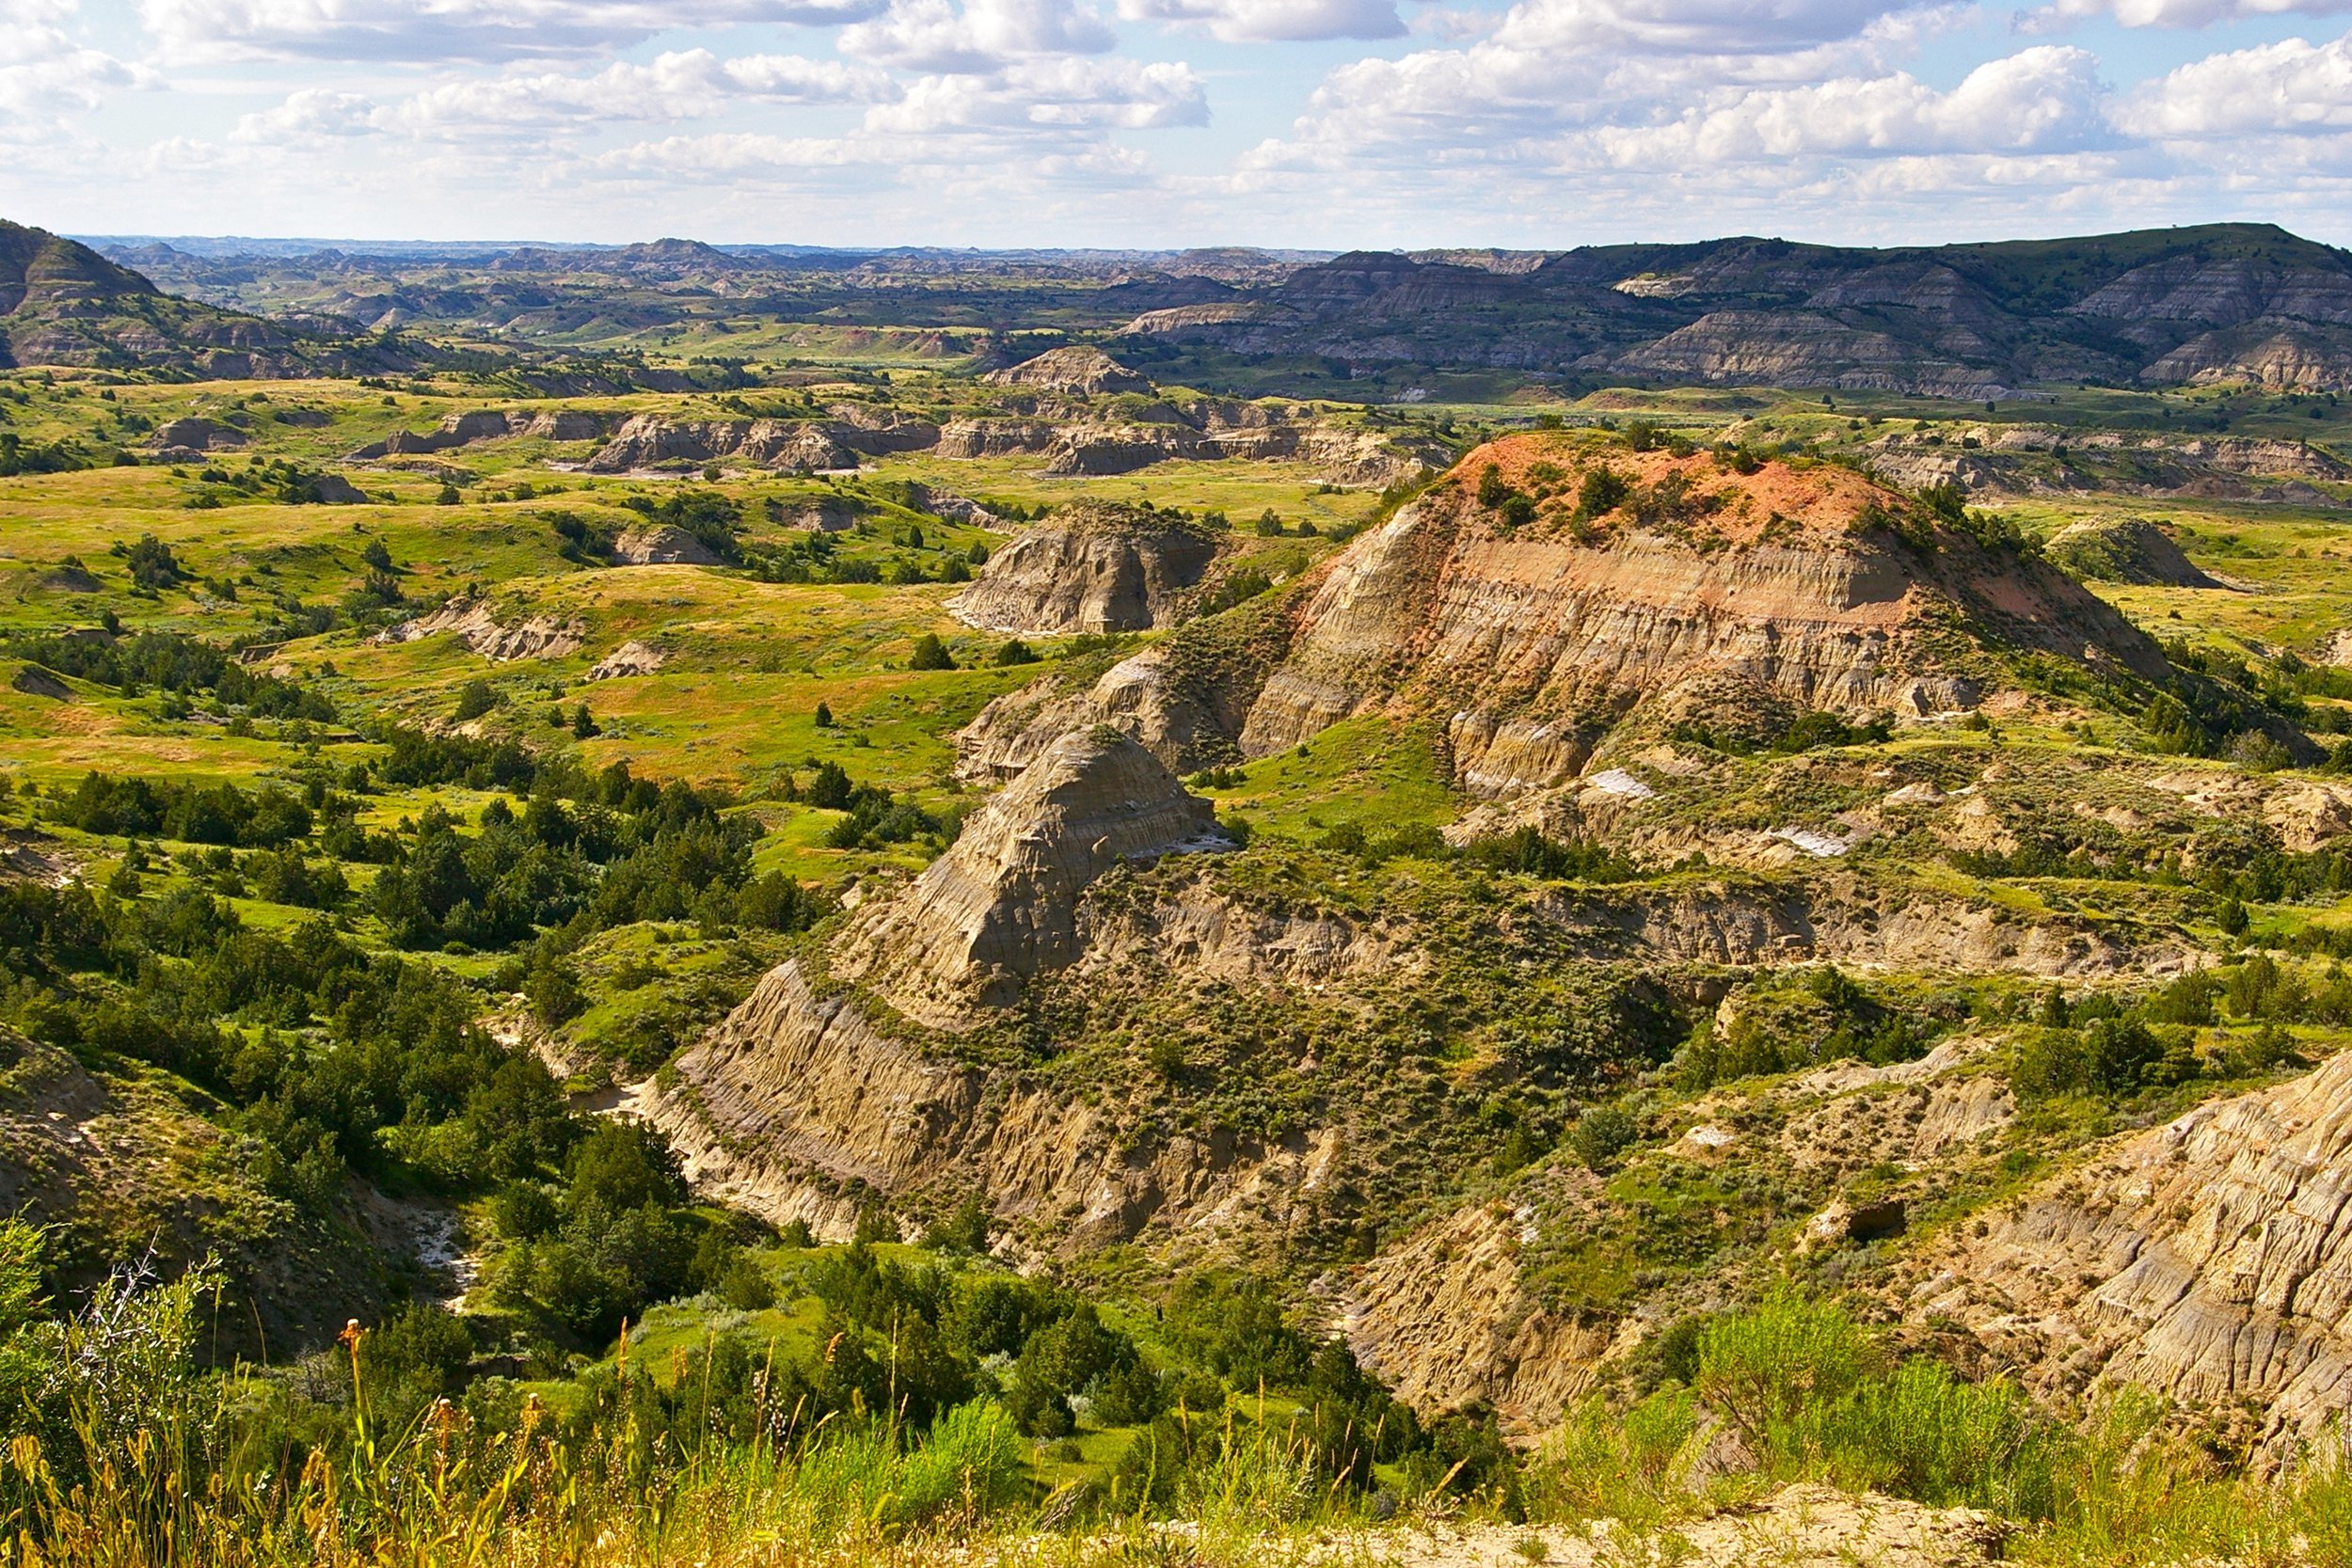 <p><a href="https://www.nps.gov/thro/index.htm">Theodore Roosevelt National Park</a> is home to Maltese Cross Cabin, which Theodore Roosevelt had built shortly after his first excursion to the Badlands in the 1880s. Ranger-led tours are available during summer. In addition to the cabin, visitors can explore hiking trails, go horseback riding, and observe wildlife, including bison, badgers, elk, feral horses, golden eagles, and wild turkeys.</p>